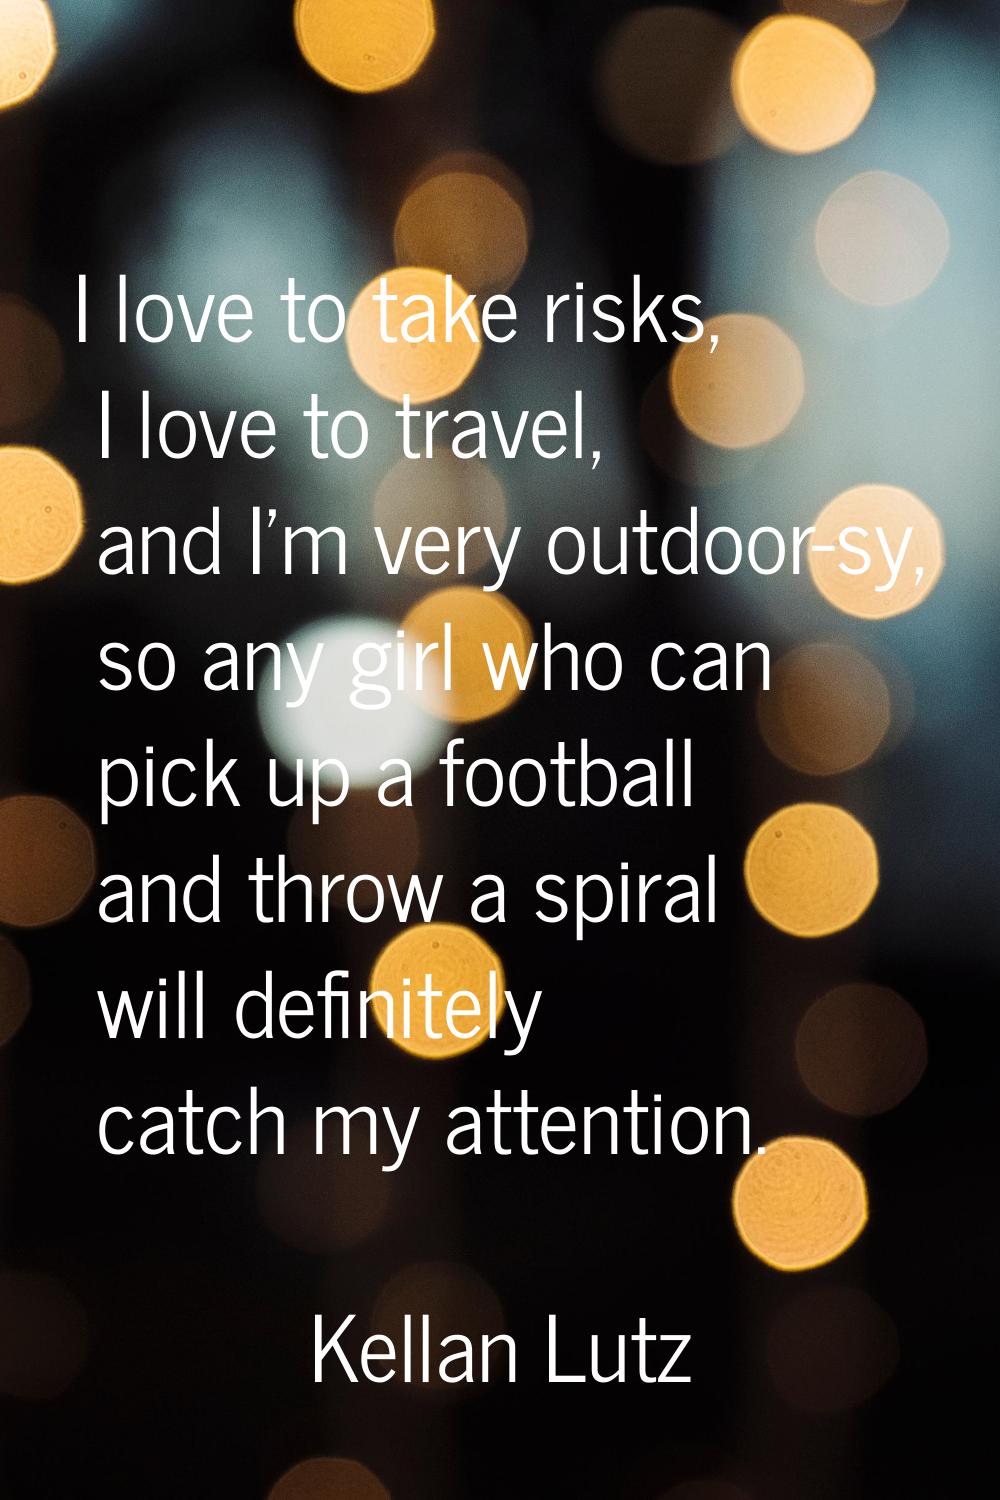 I love to take risks, I love to travel, and I'm very outdoor-sy, so any girl who can pick up a foot